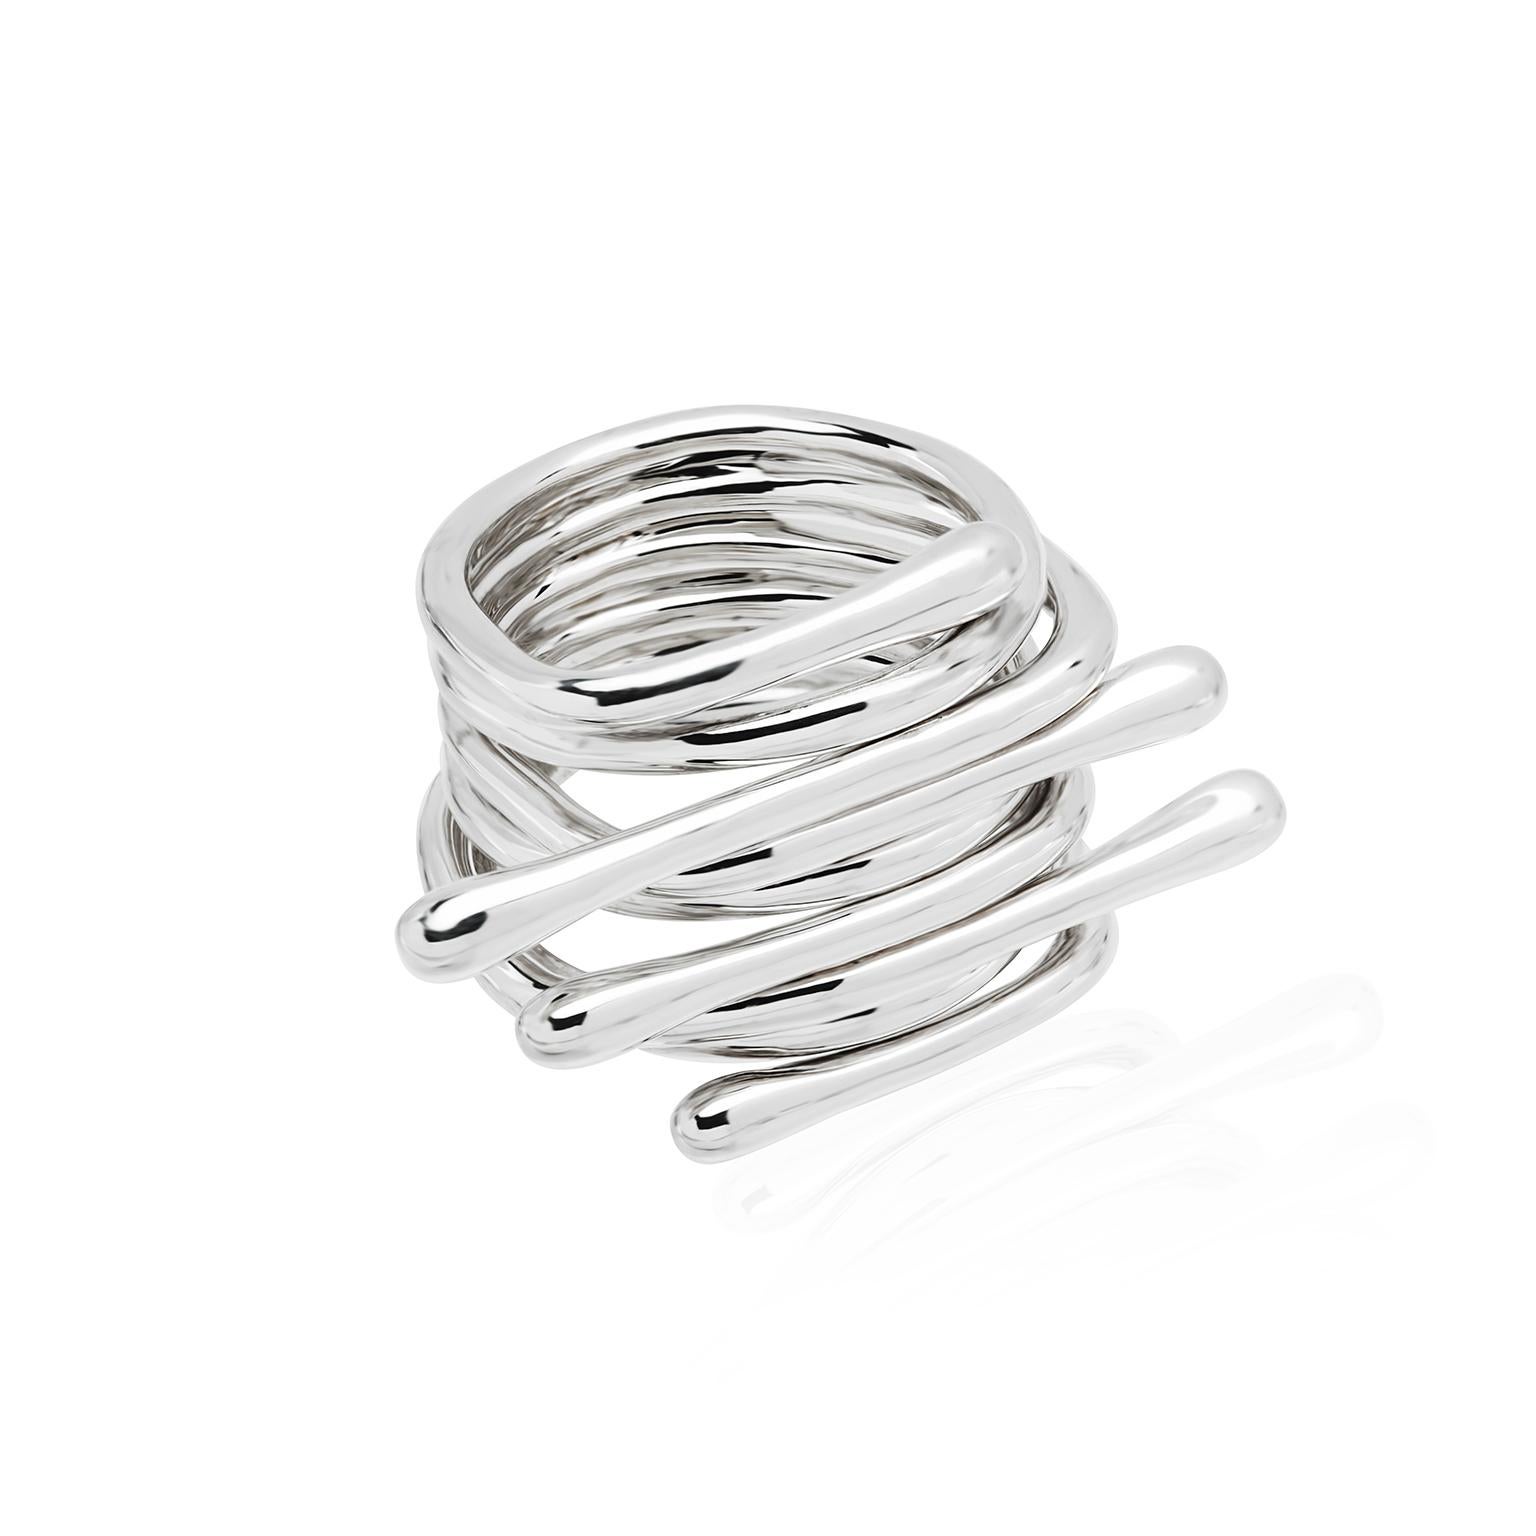 A tribute to Nature's breathtaking perfection may be seen in this stunning sterling silver ring made with different circular shapes in succession. Handmade by TANE's expert artisans in Mexico.

TANE, established in Mexico City in 1942, is a true